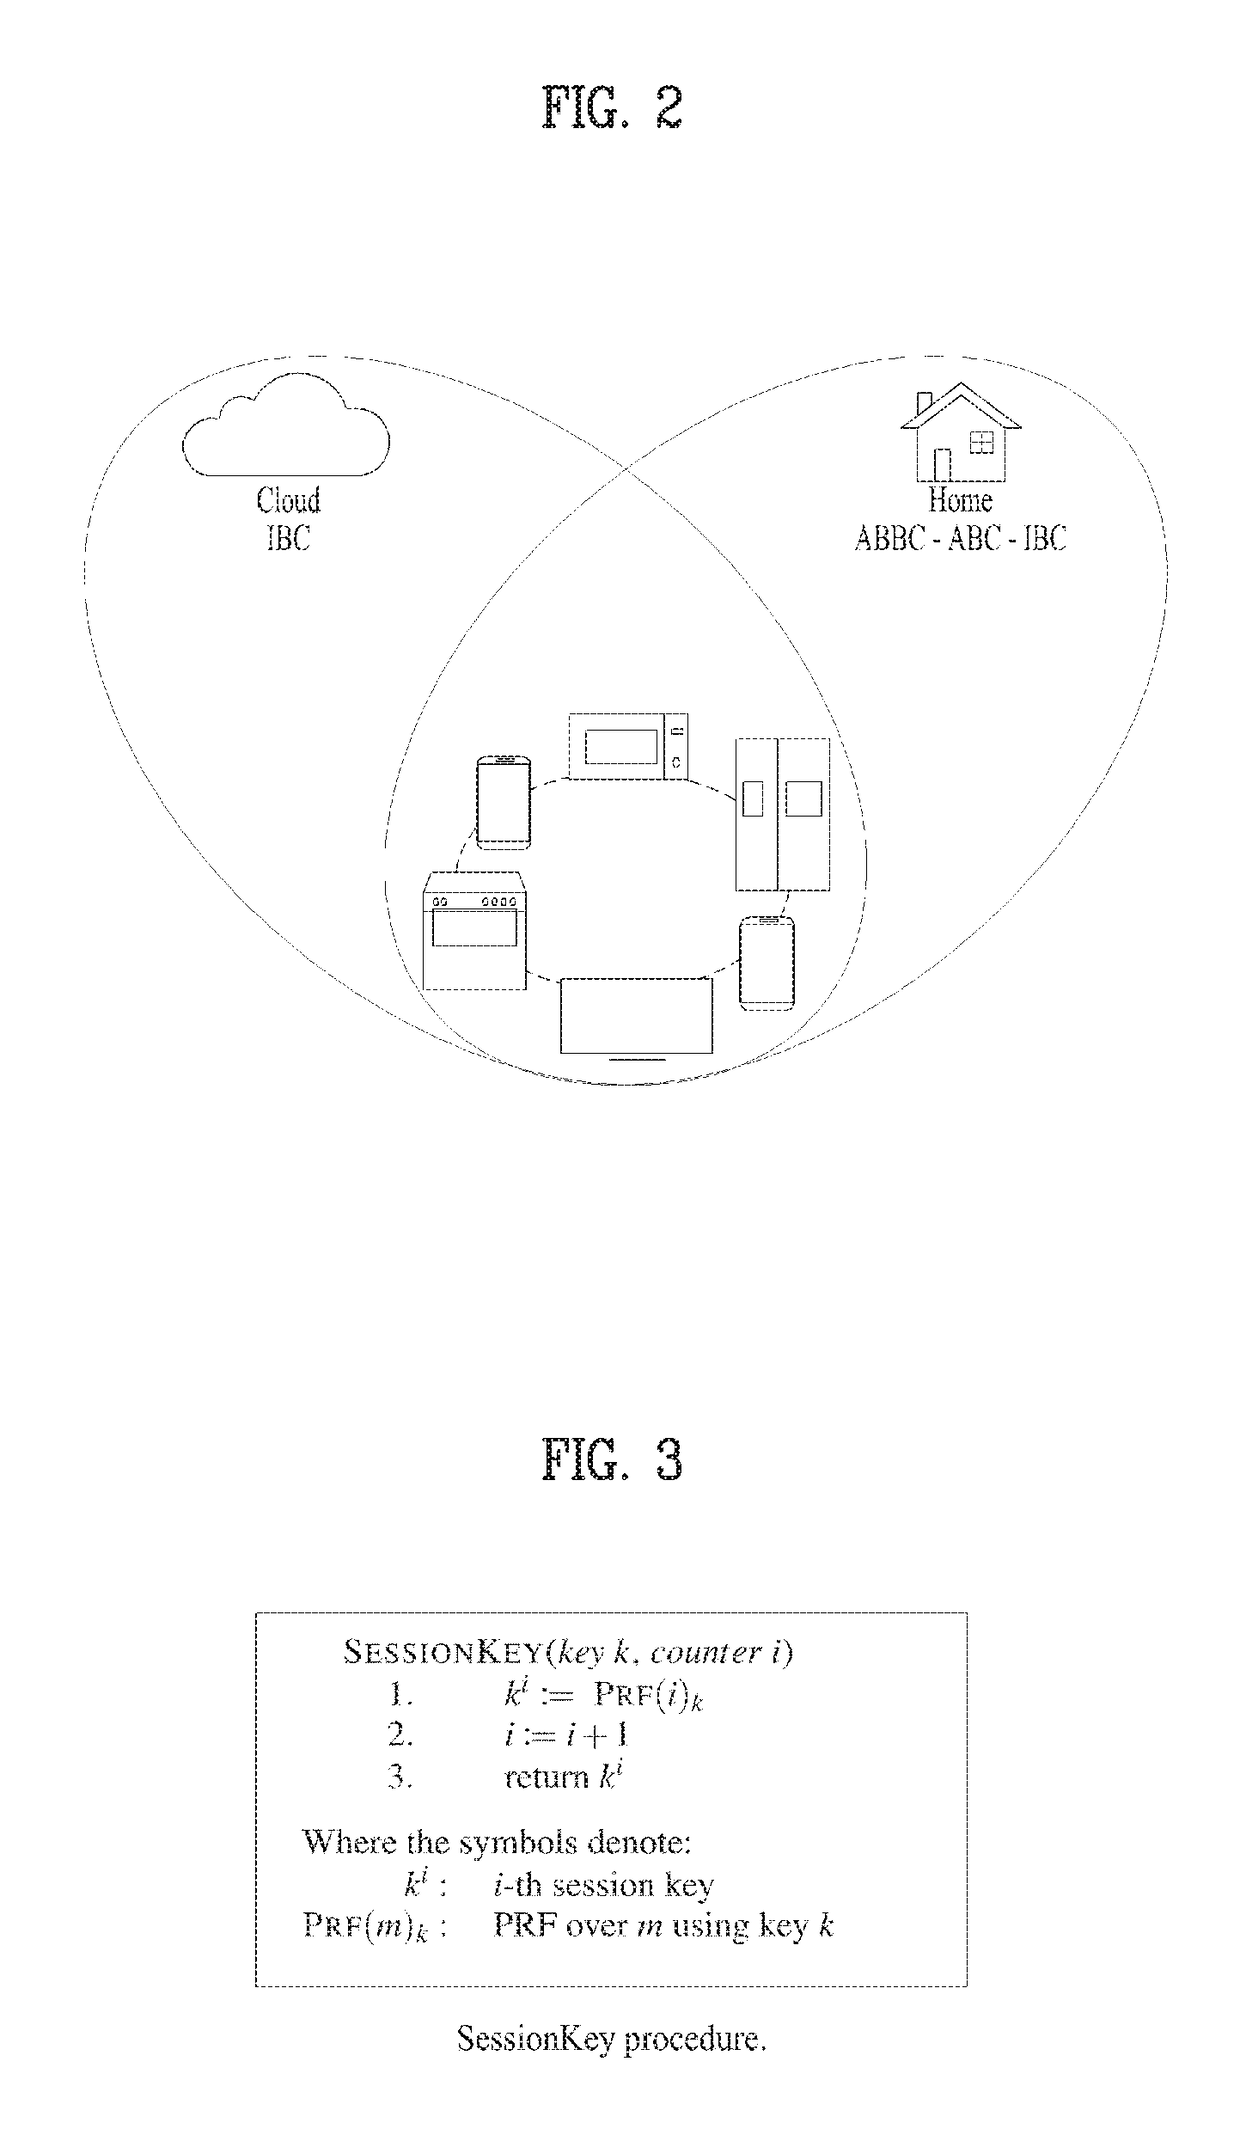 System and method for authentication of things